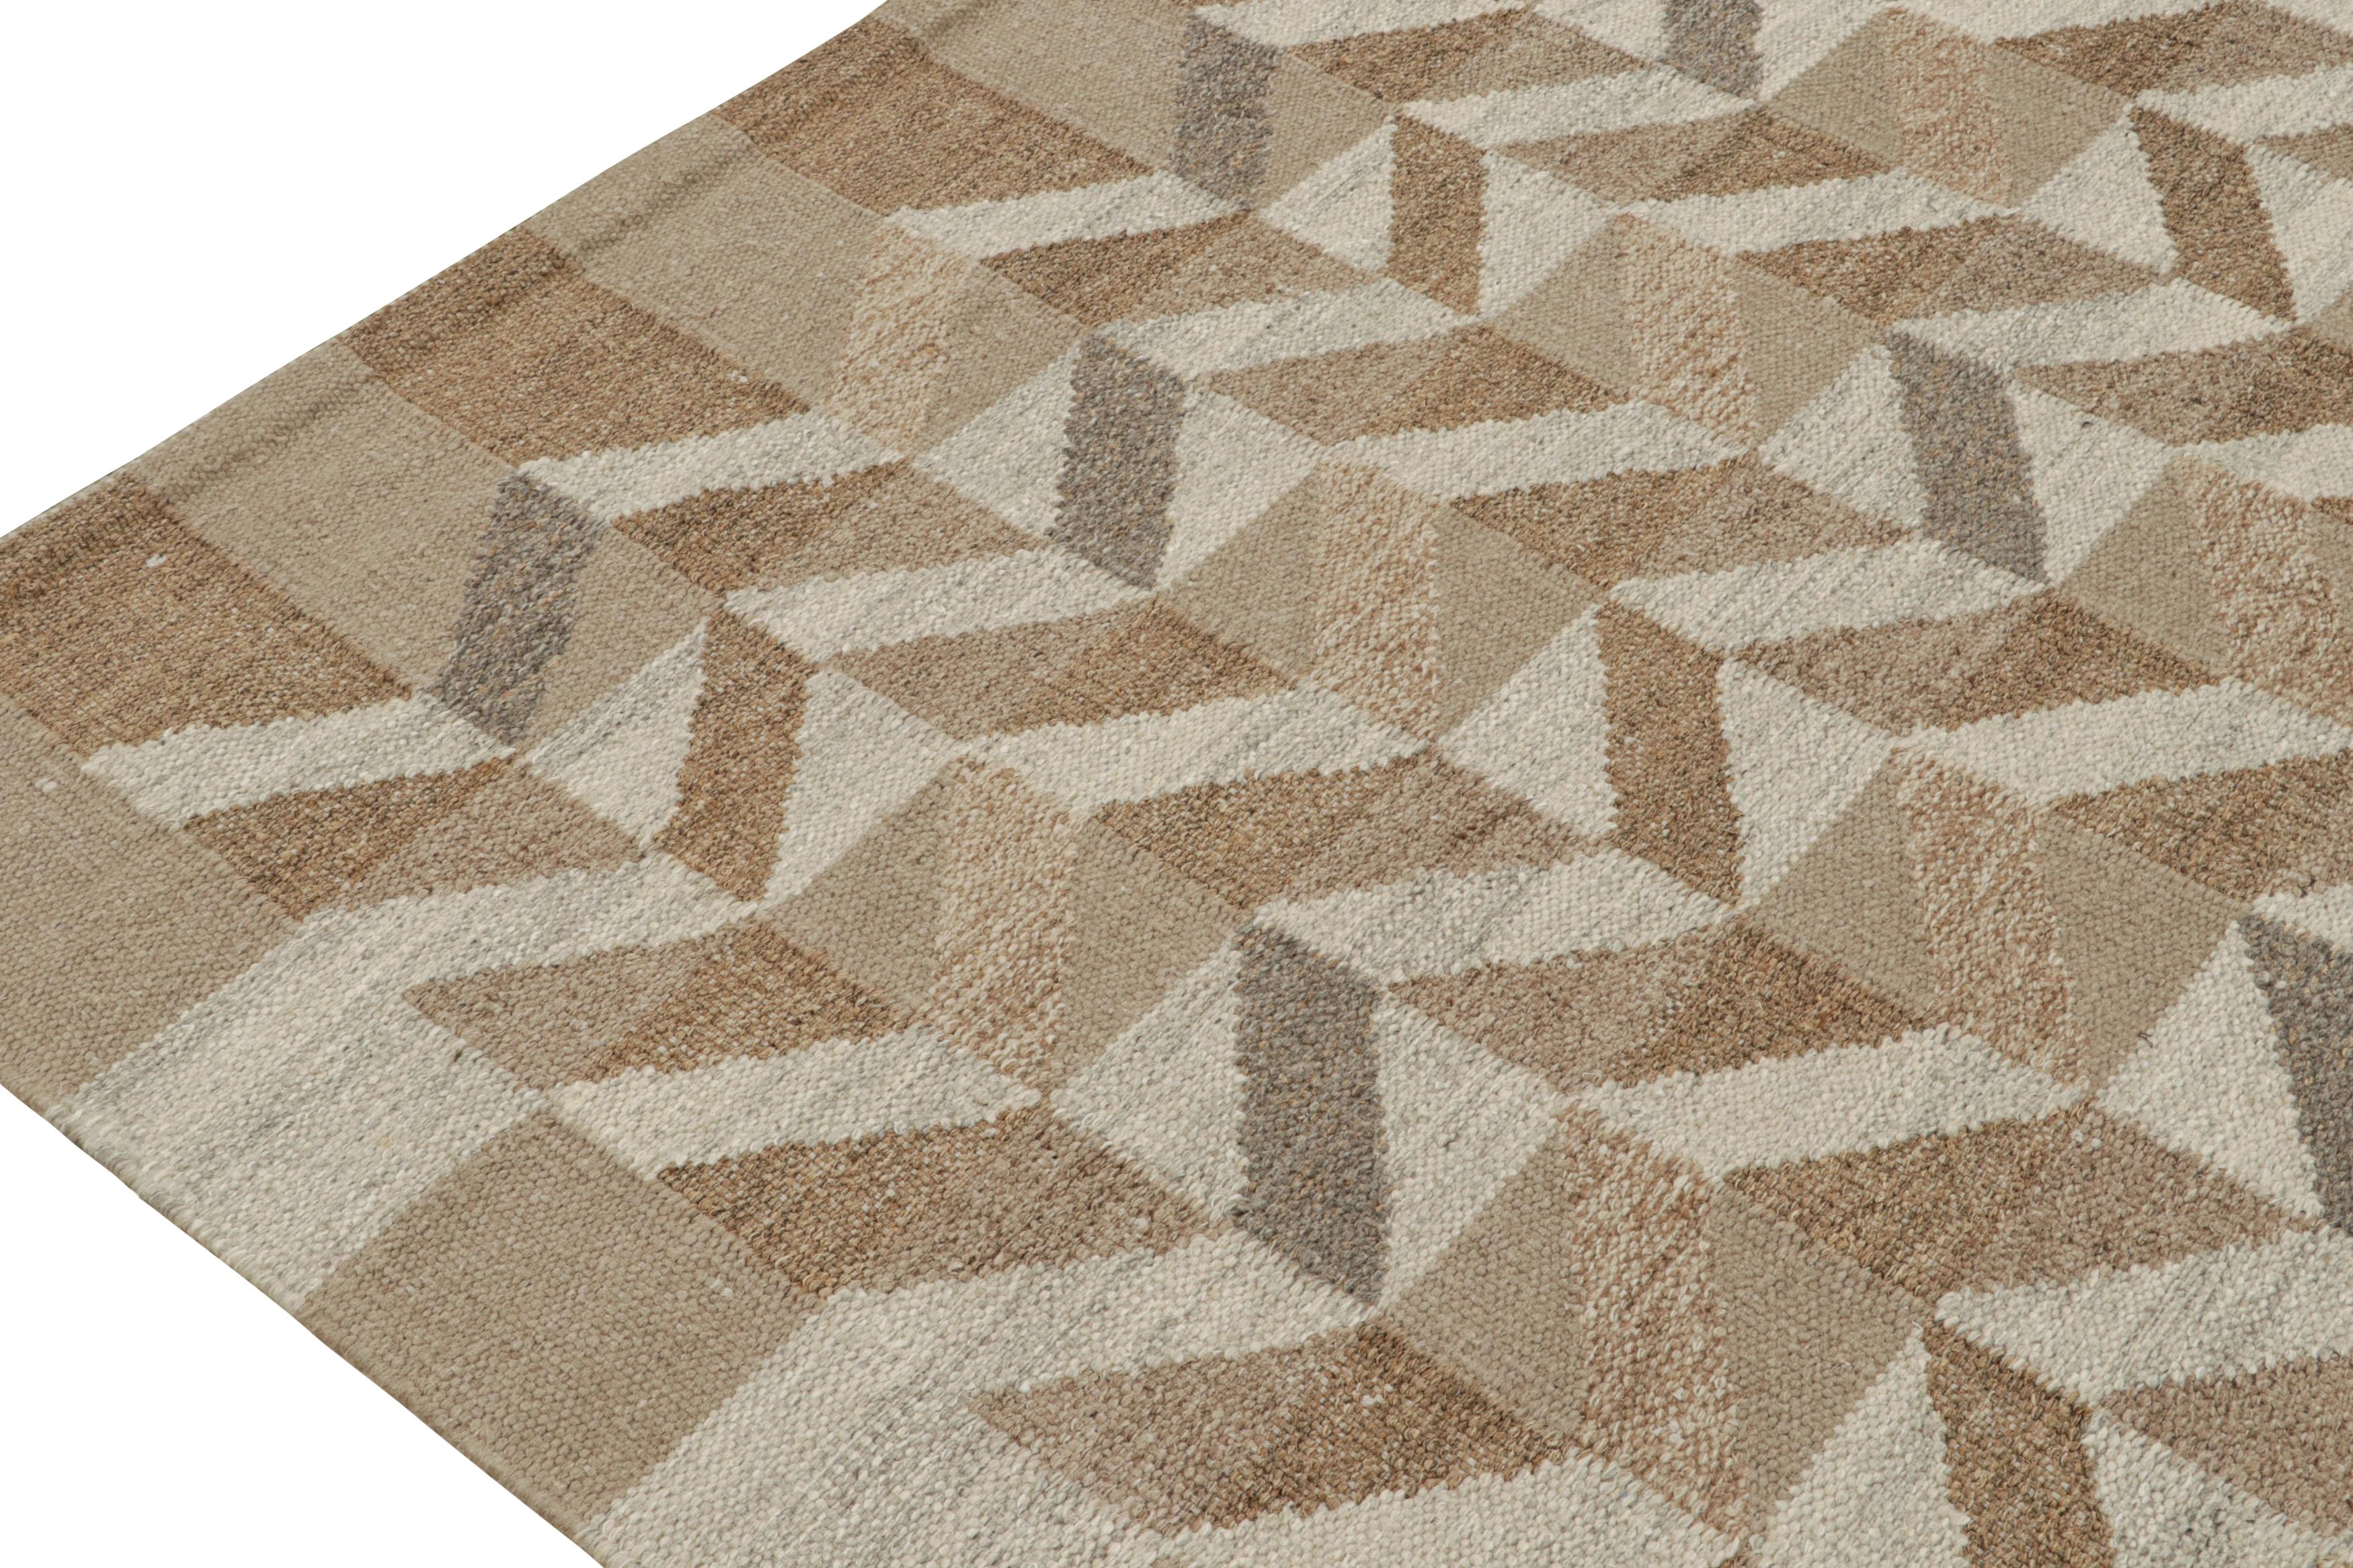 Indian Rug & Kilim’s Scandinavian Style Kilim in Gray and Beige-Brown Geometric Pattern For Sale